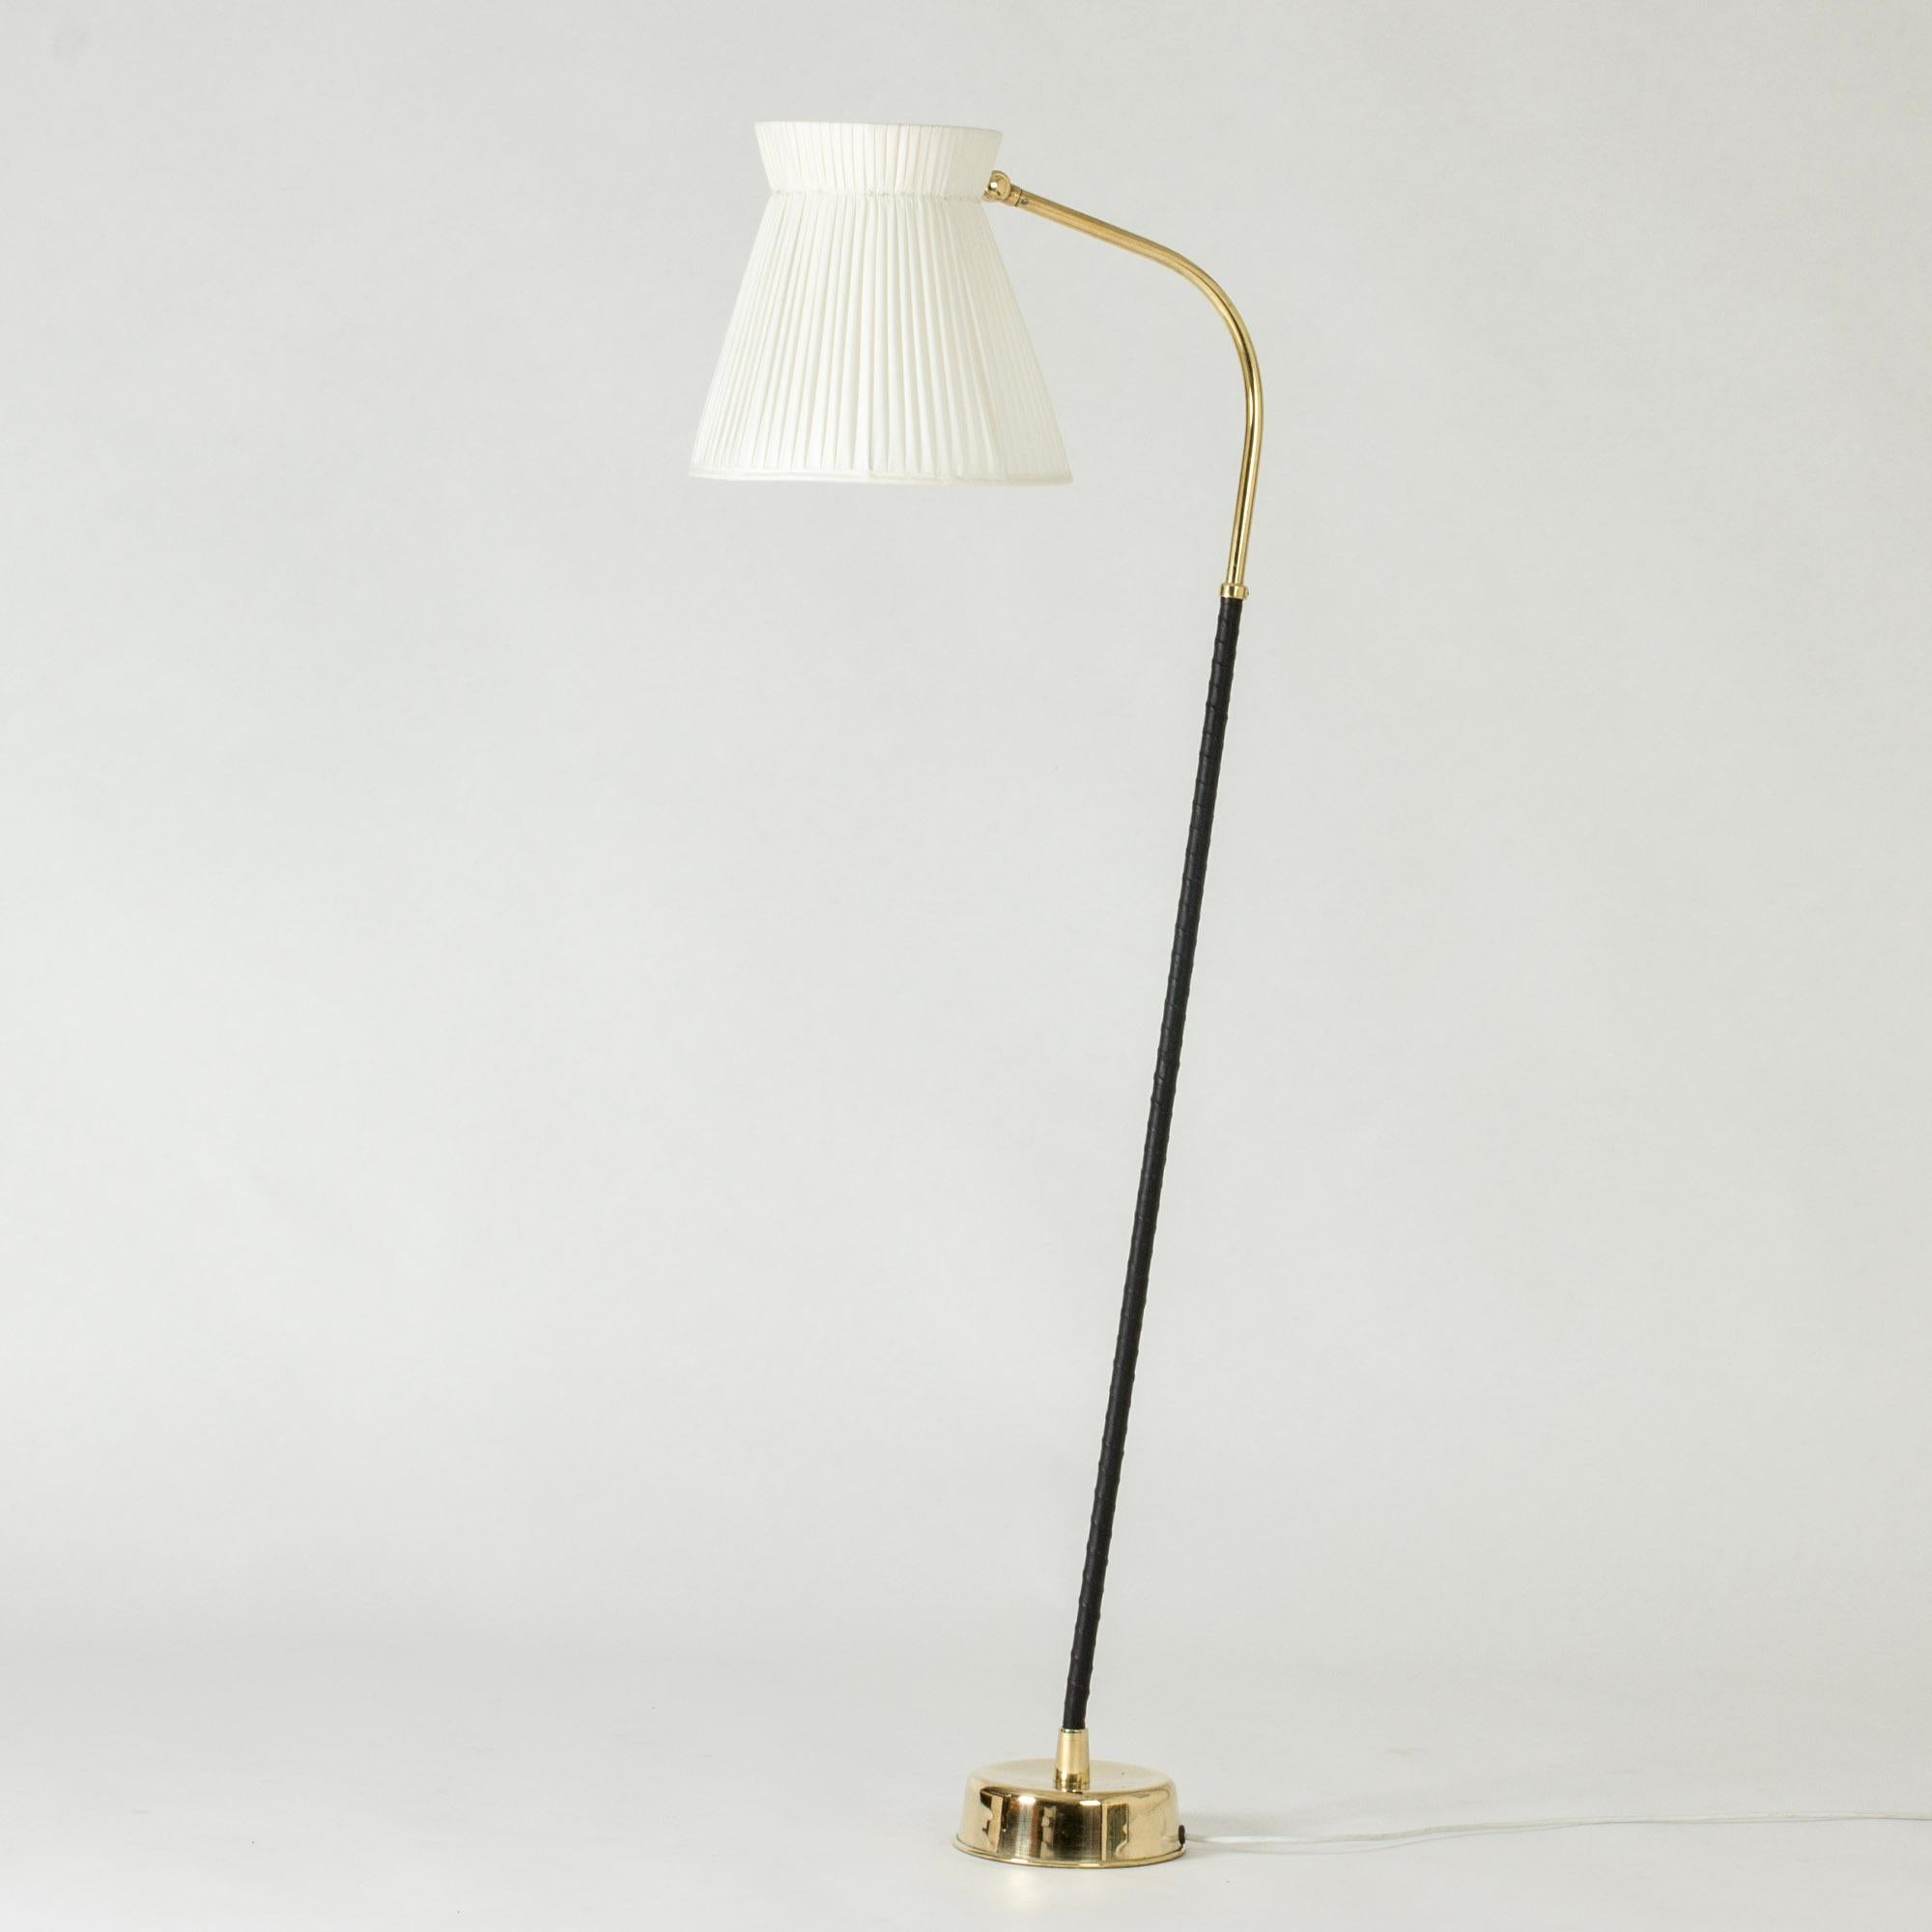 Striking floor lamp by Lisa Johansson-Pape, in a very cool, casually tilted design. Made from brass with stem wound with black leather, voluminous pleated shade.